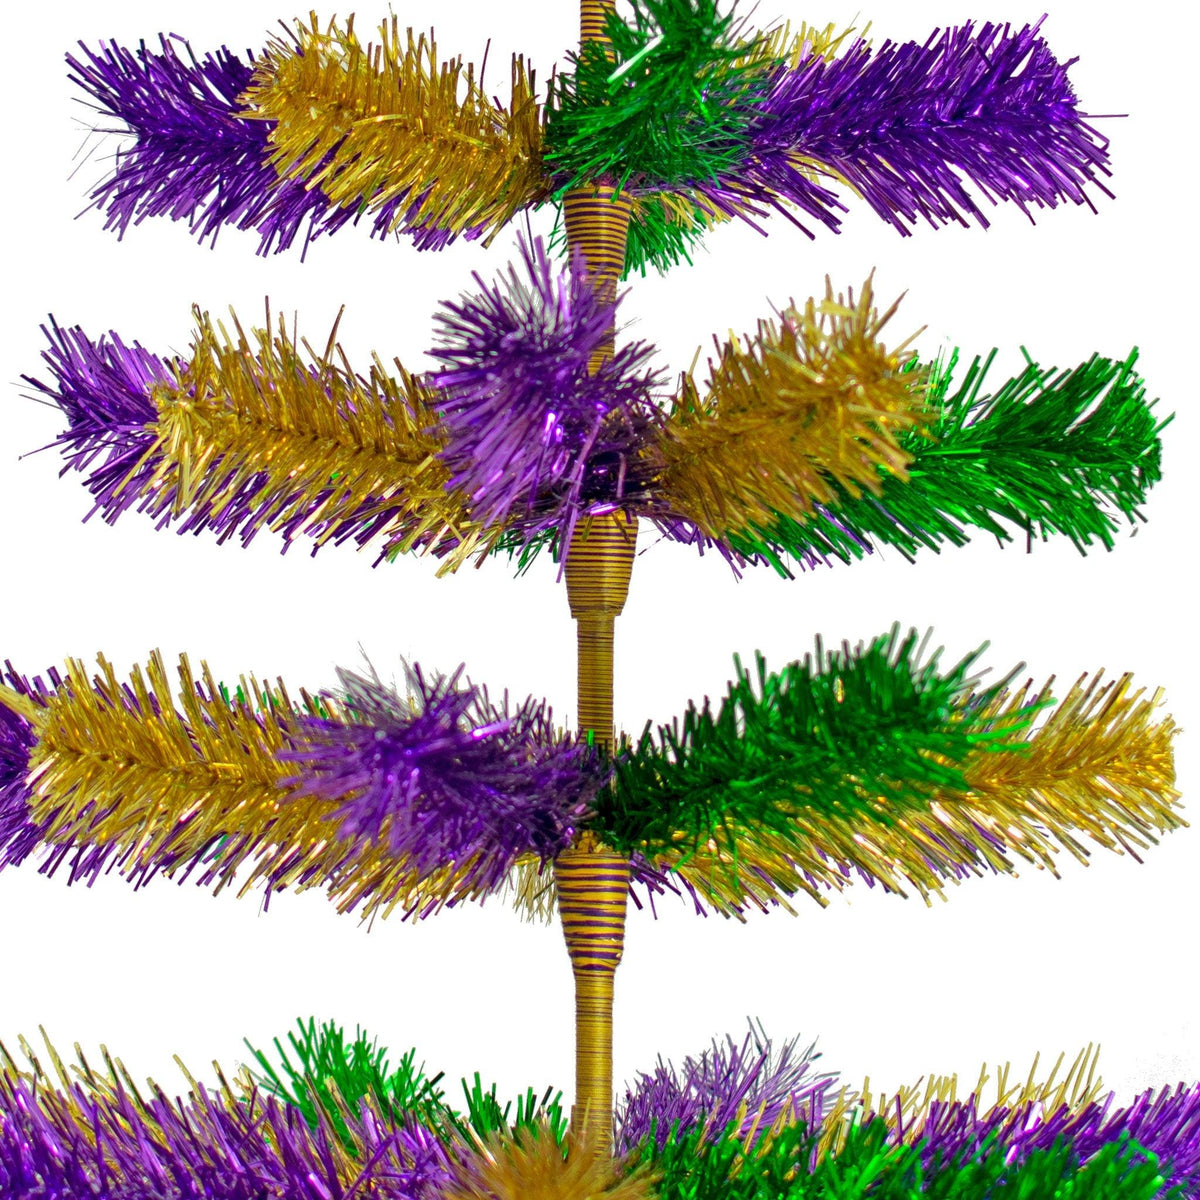 Lee Display's Mardi Gras Themed Christmas Tree on Sale Now 24in